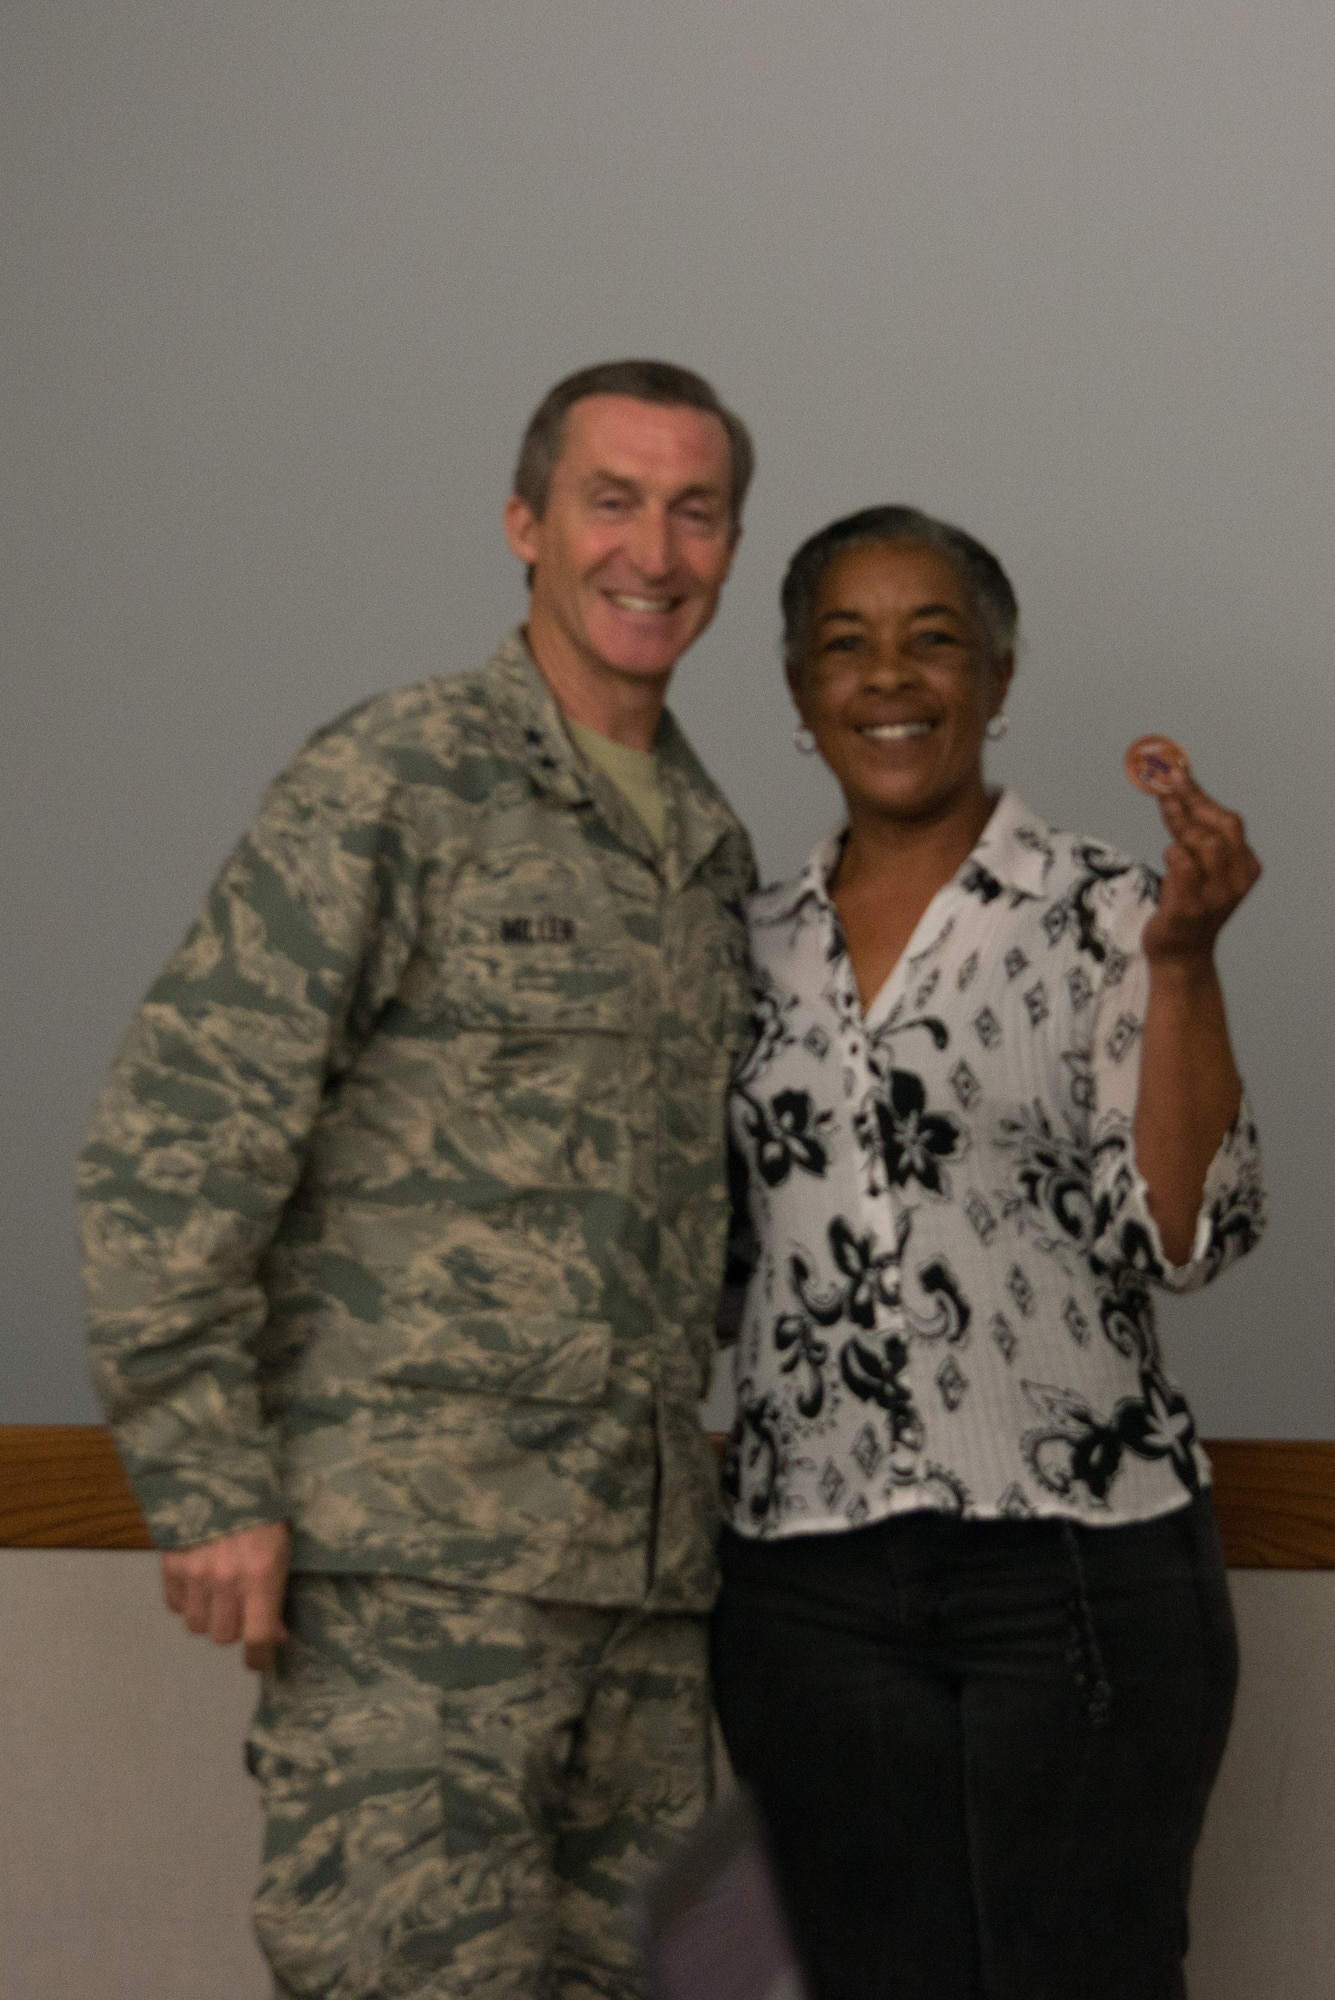 Carolyn F. Laguer, 482nd Force Support Squadron, received a coin from Tenth Air Force Commander, Maj. Gen. Ronald B. “Bruce” Miller in recognition of her contribution to the conference.